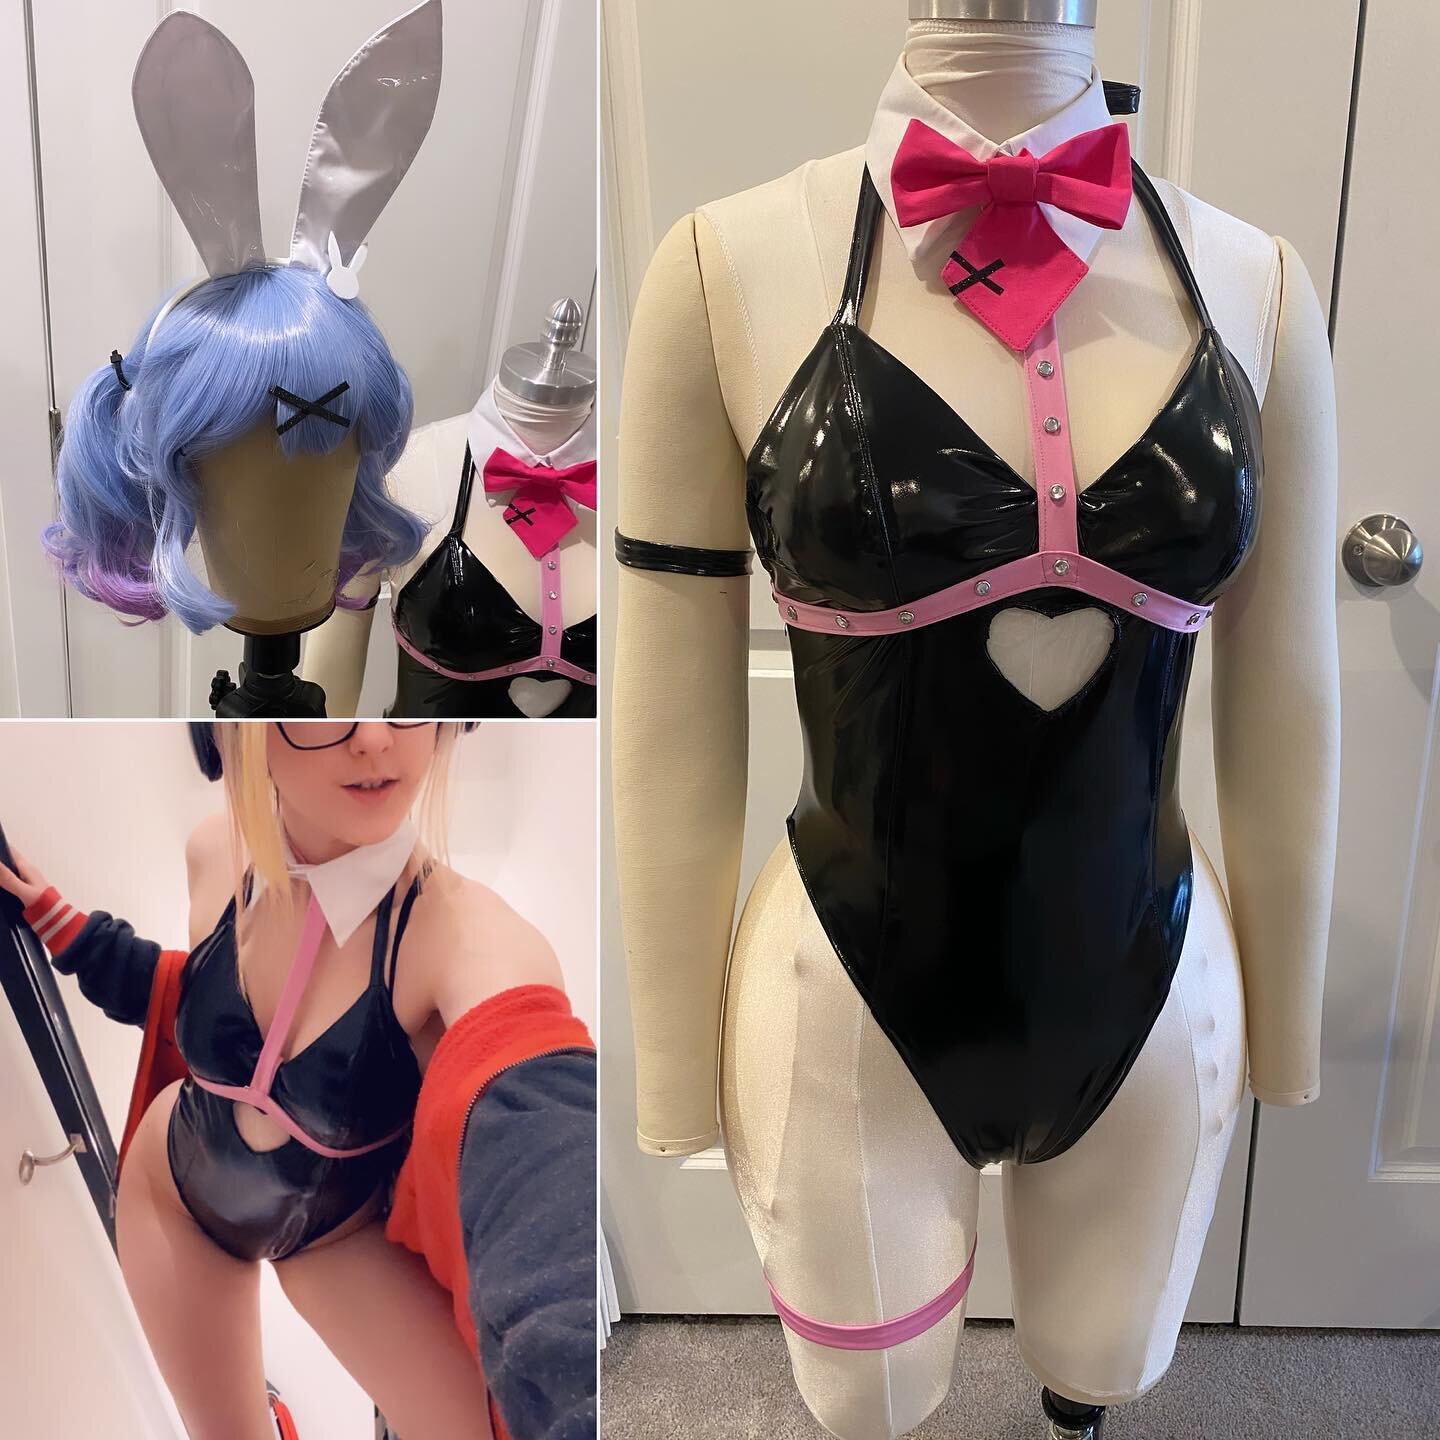 Made a Bunnysuit!  Working on Rabbit Hole Miku.  I only have a few things left to make for it then it&rsquo;s done! 

#miku #mikucosplay #hatsunemiku #rabbitholemiku #hatsunemikucosplay #bunnymiku